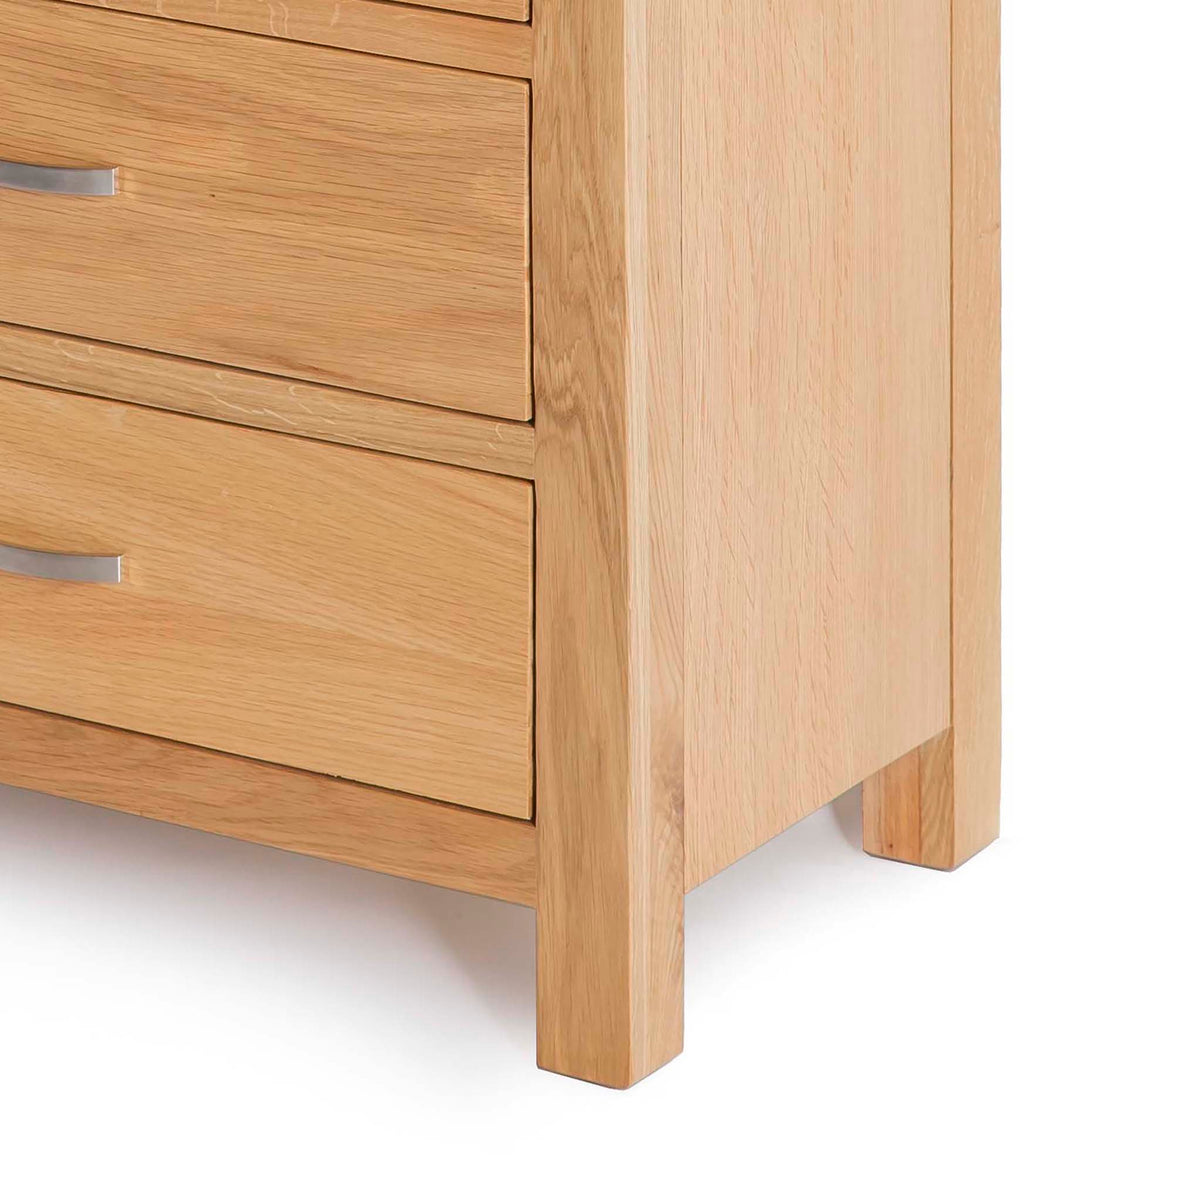 London Oak 5 Drawer Chest - Close up of base of drawers